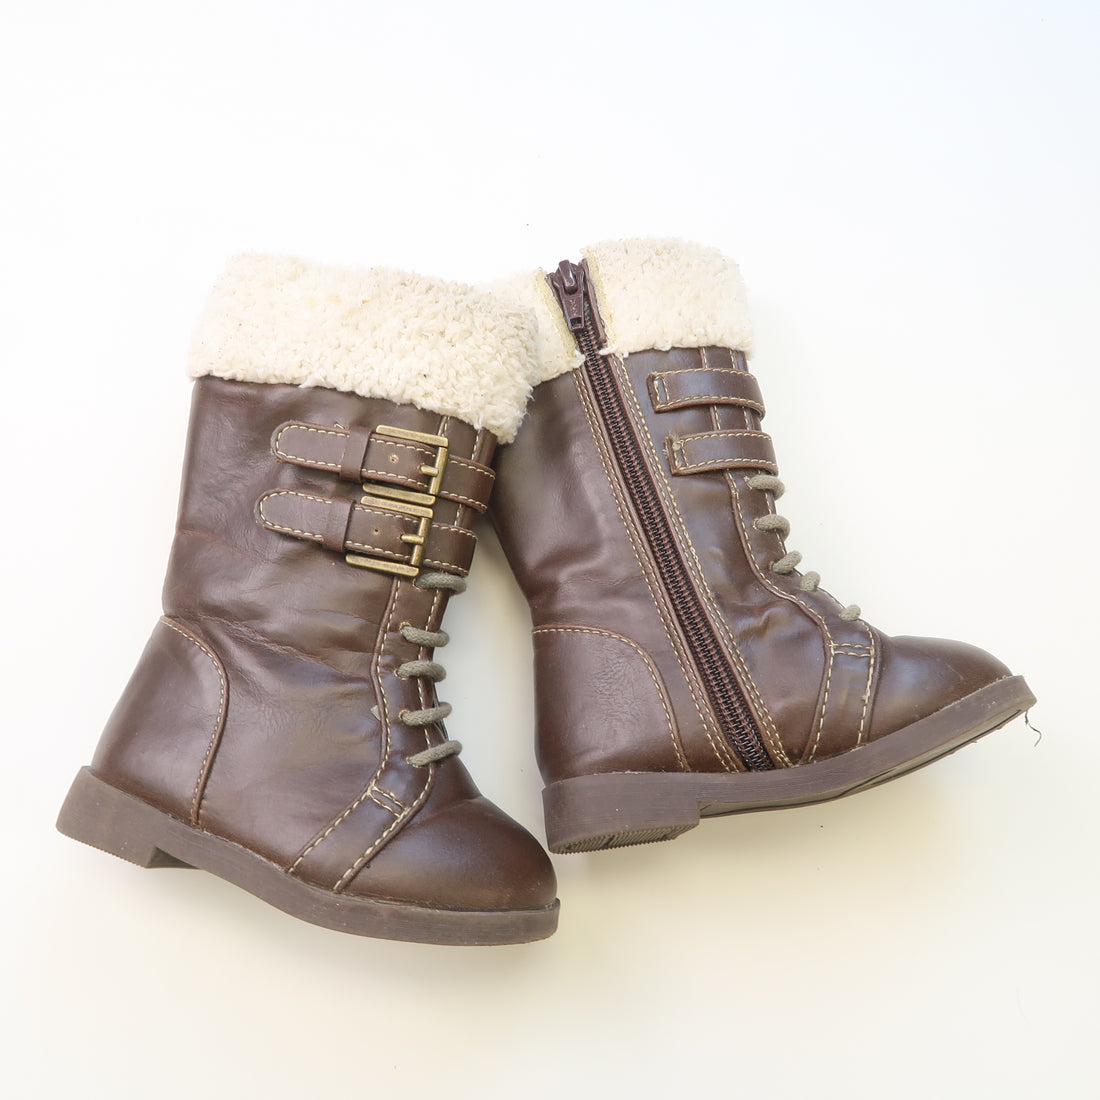 Old Navy - Boots (Shoes - 5)